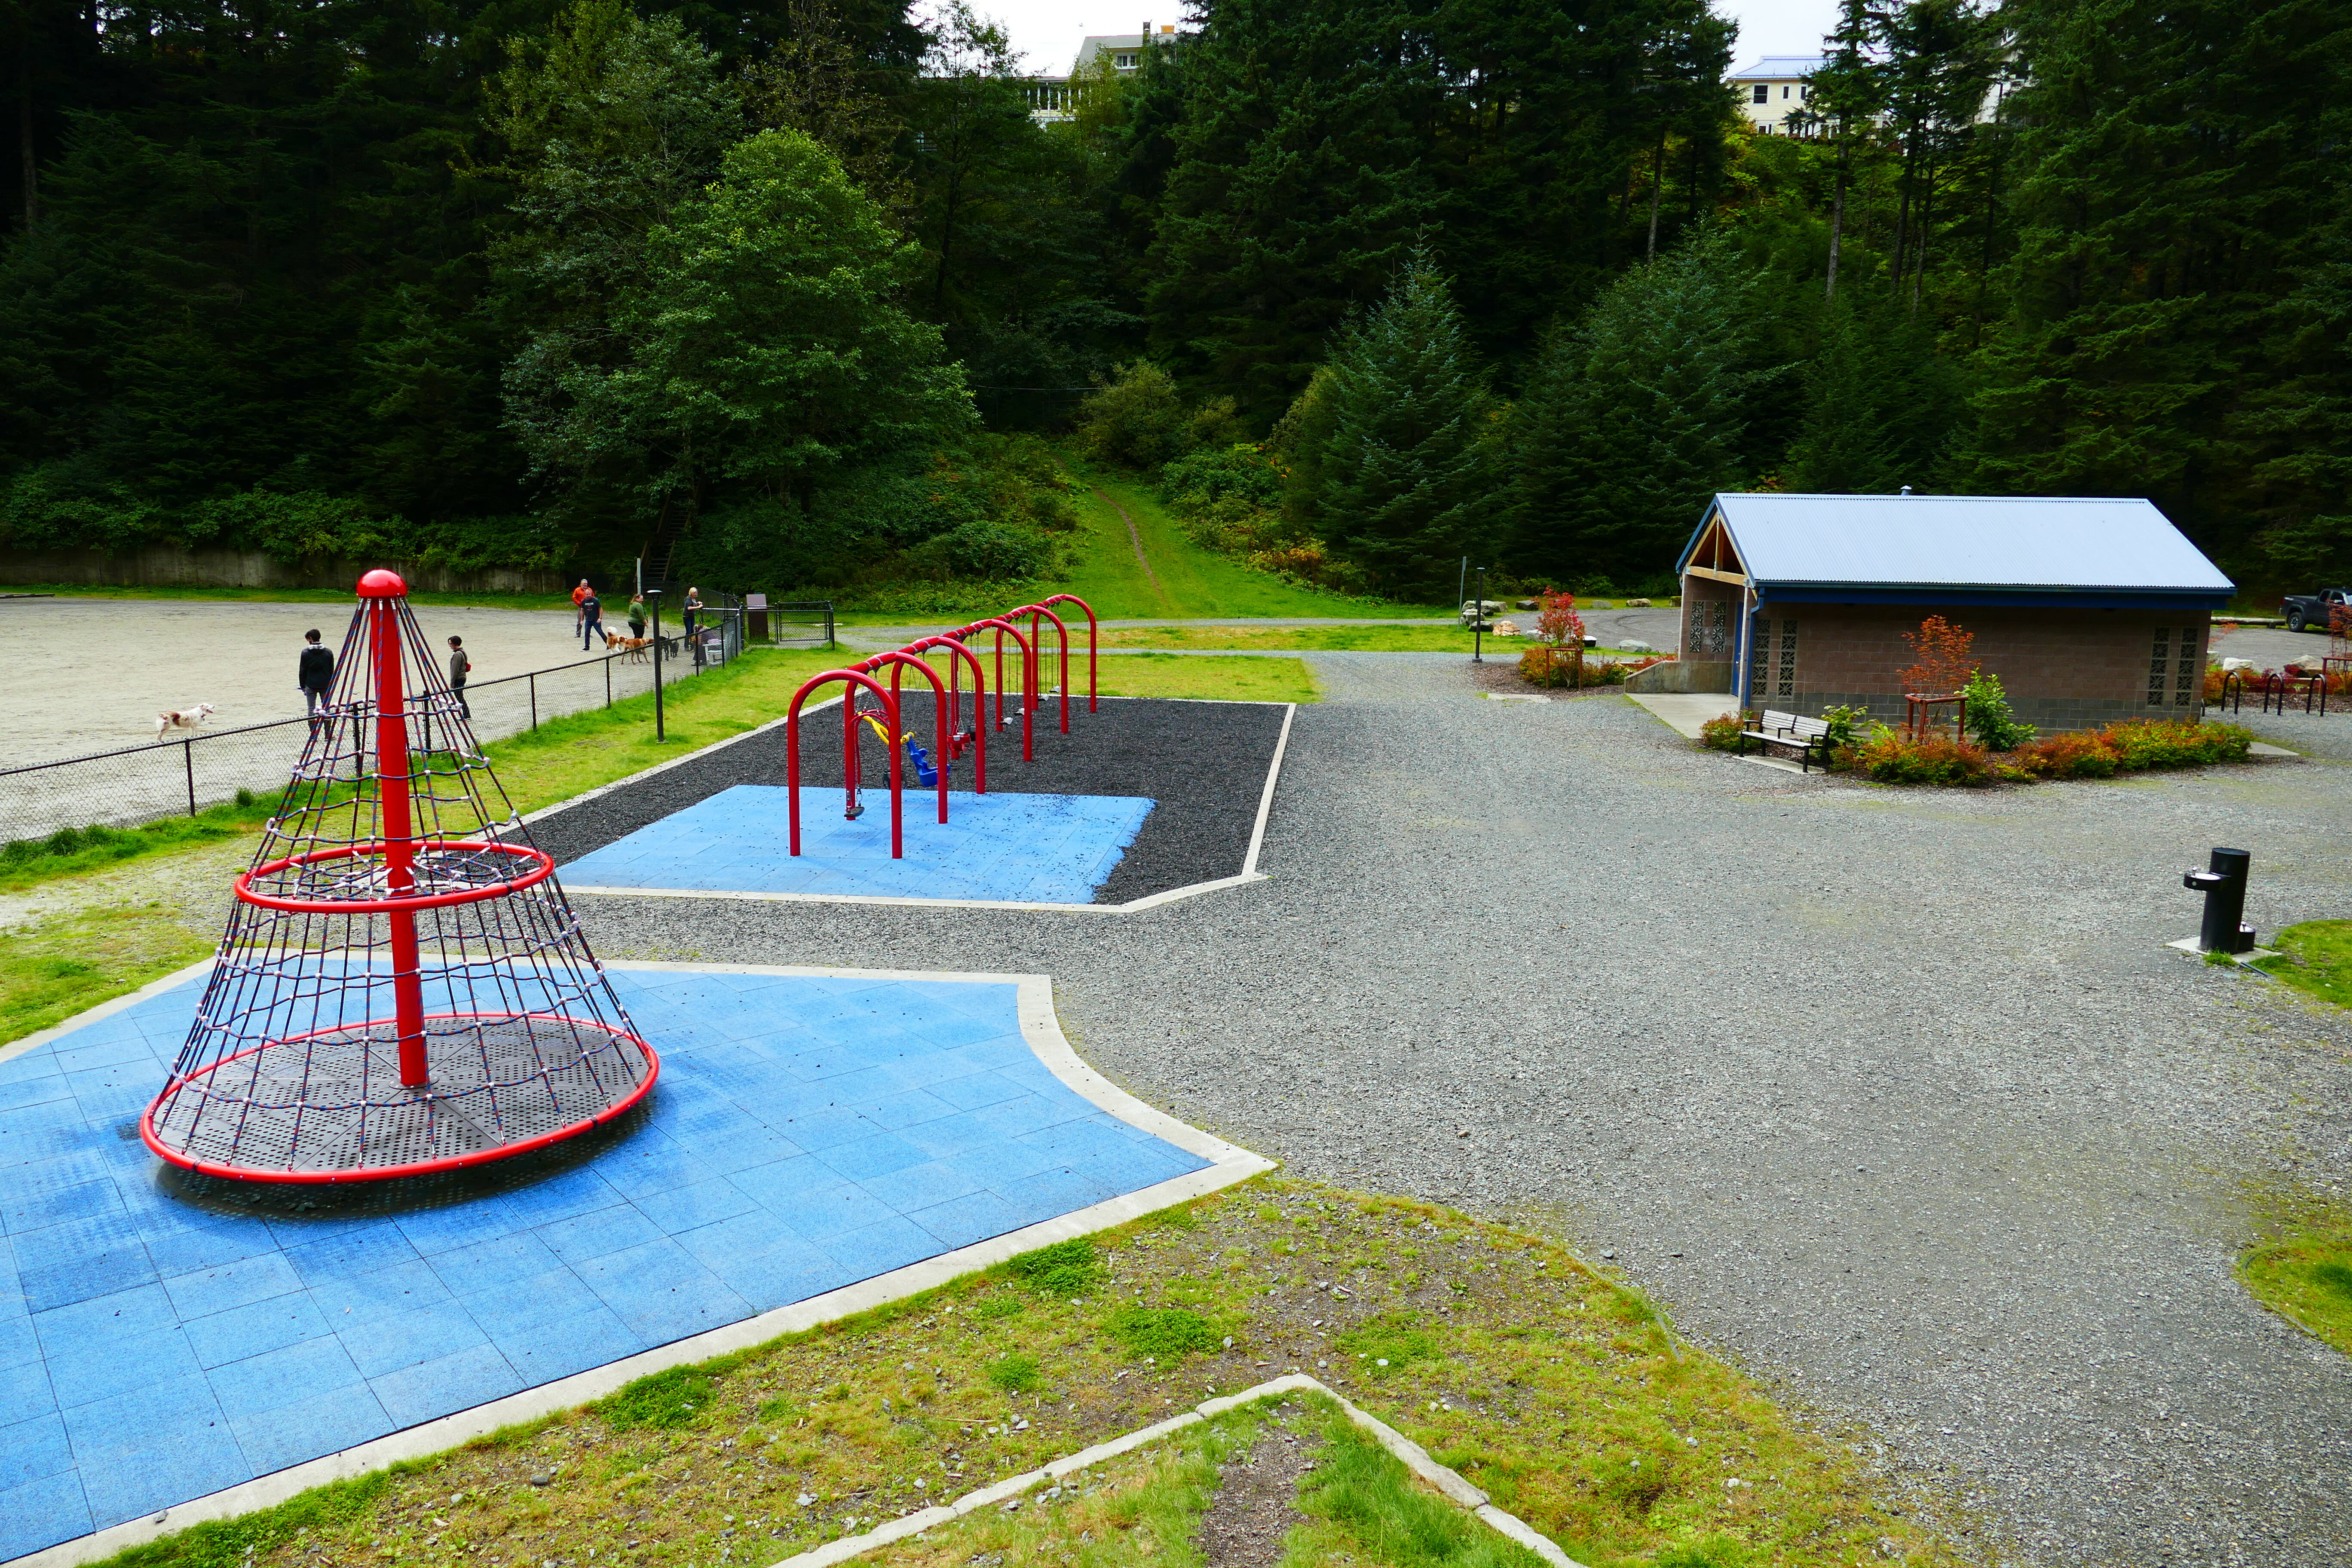 View of playground area in Cope Park